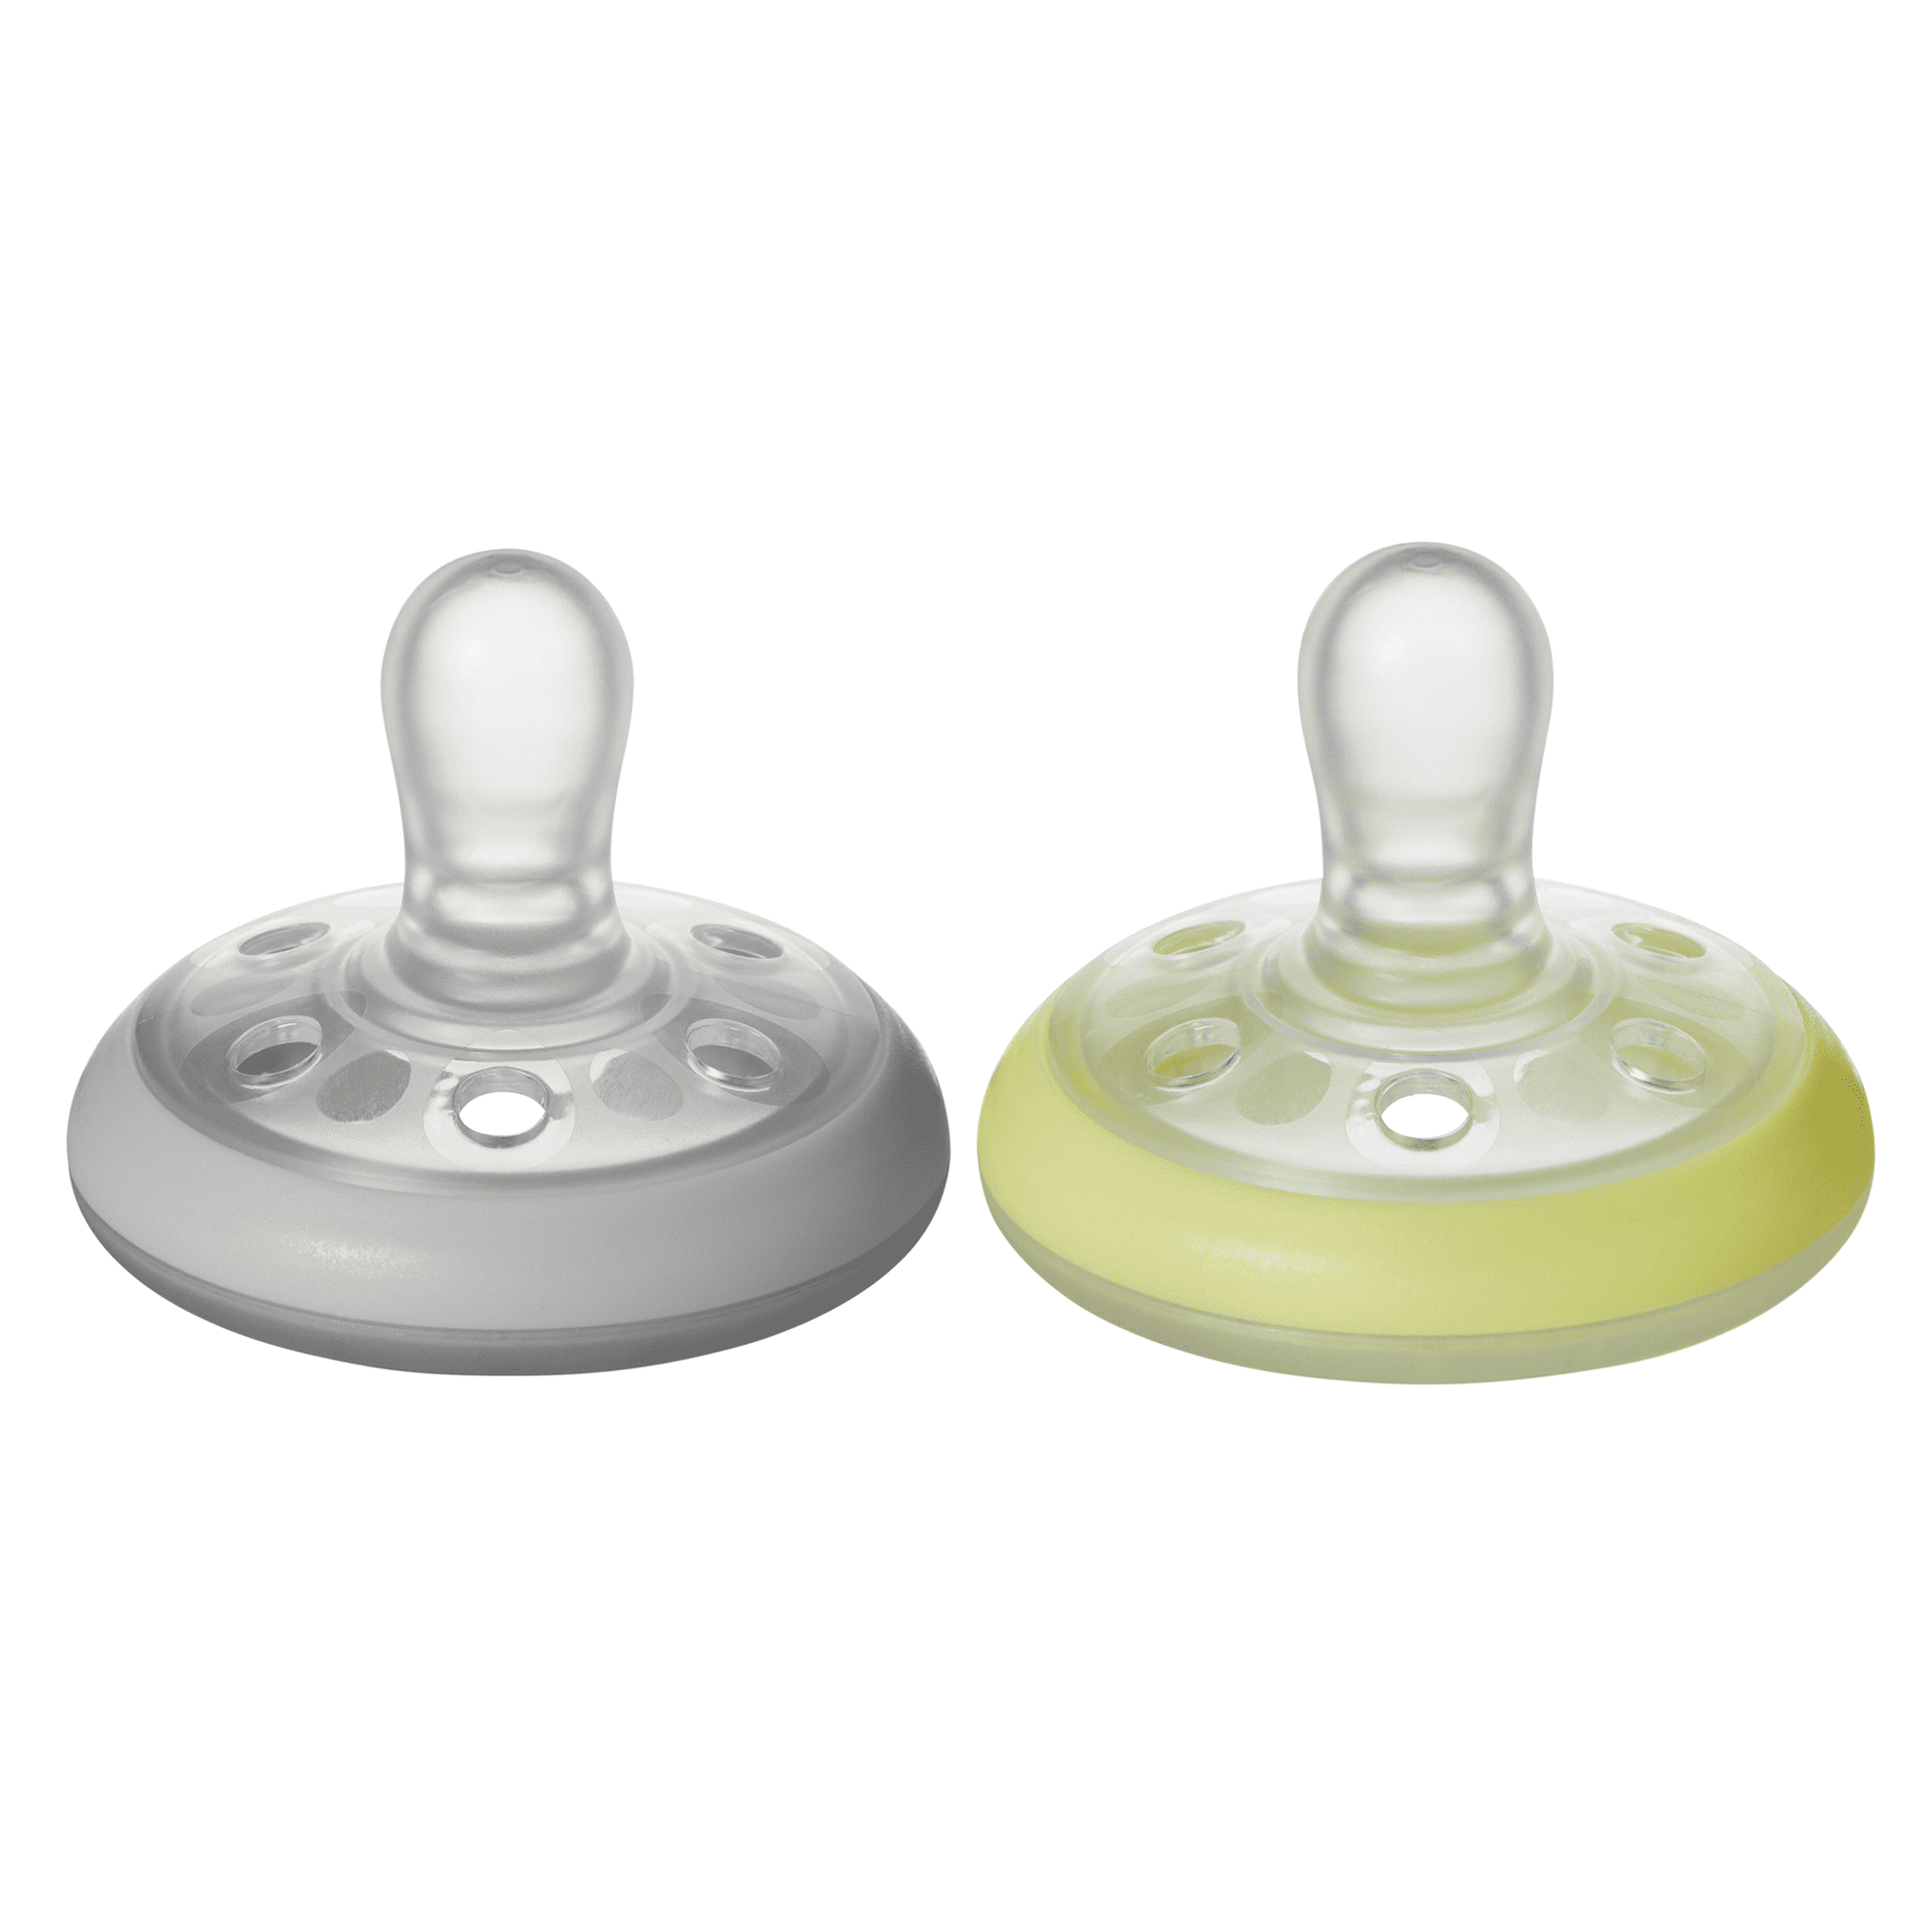 Tommee Tippee Breast-Like Soother, Skin-Like Texture, Symmetrical